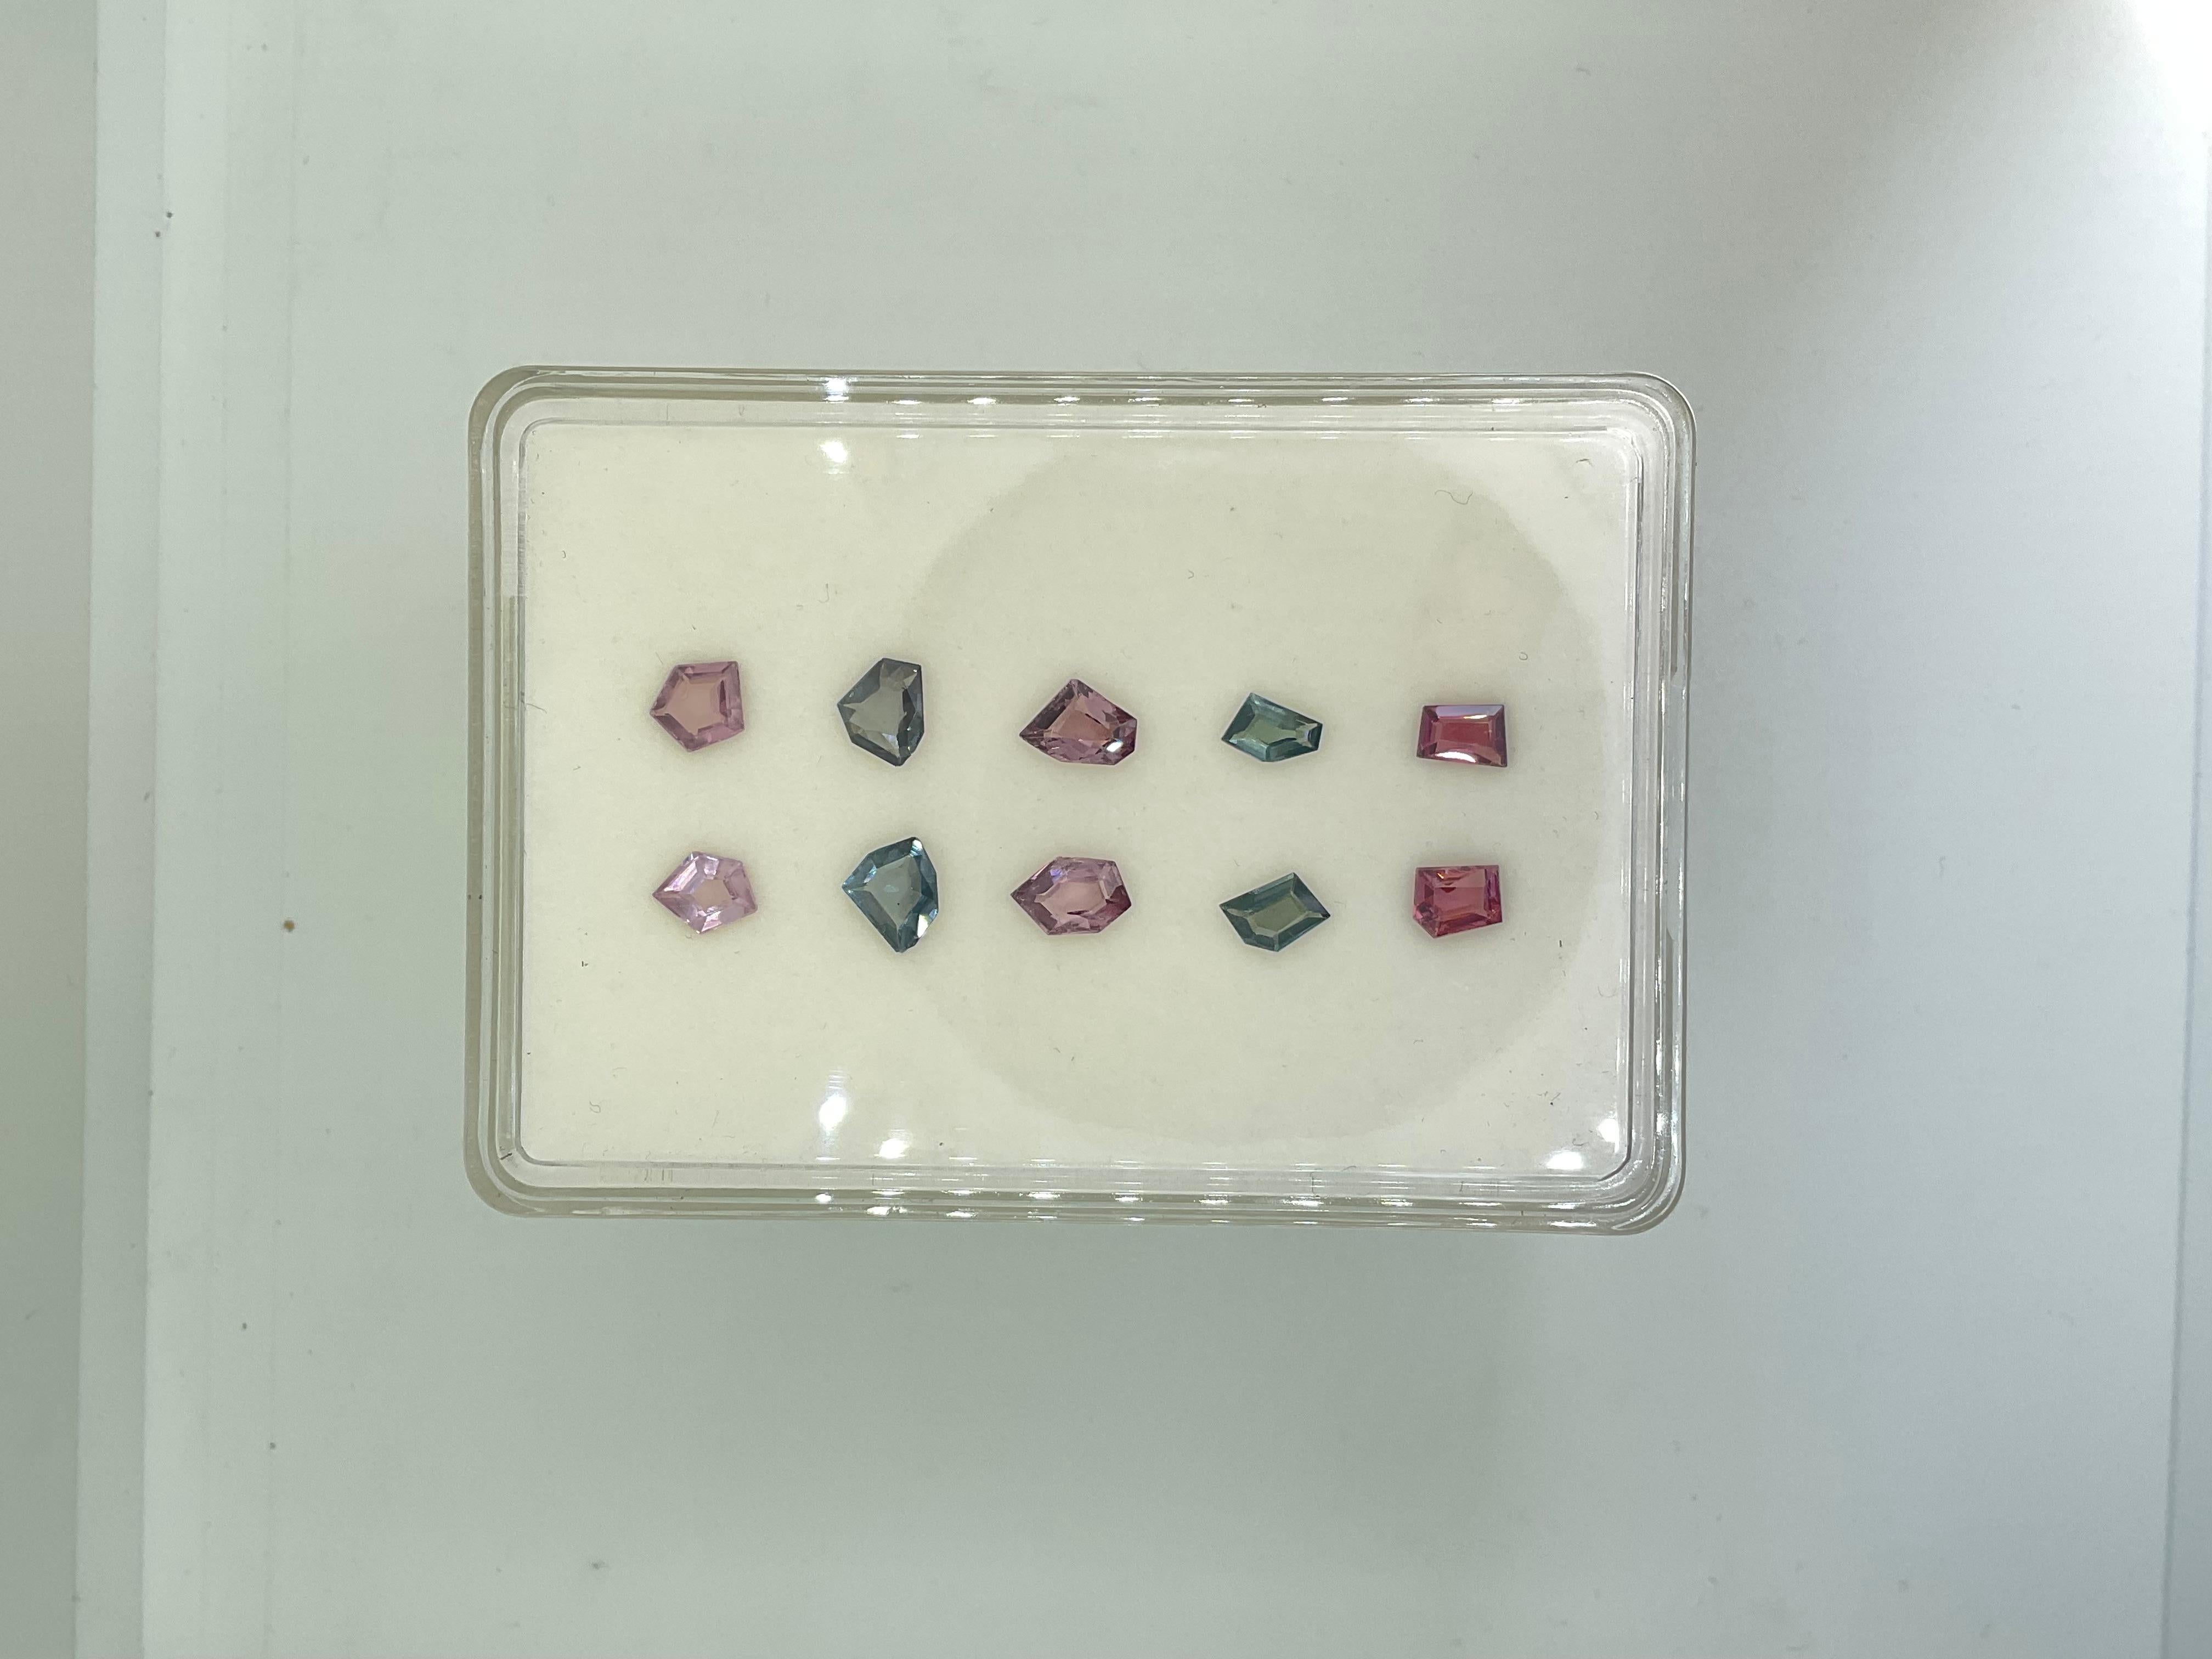 8.05 Carats Grey & Pink Spinel Fancy Cut Stone Natural Gem For Top Fine Jewelry

Gemstone: Spinel
Weight: 8.05 Carats
Size: 4x6 To 8x6 MM
Pieces: 10
Shape: Fancy Cut stones